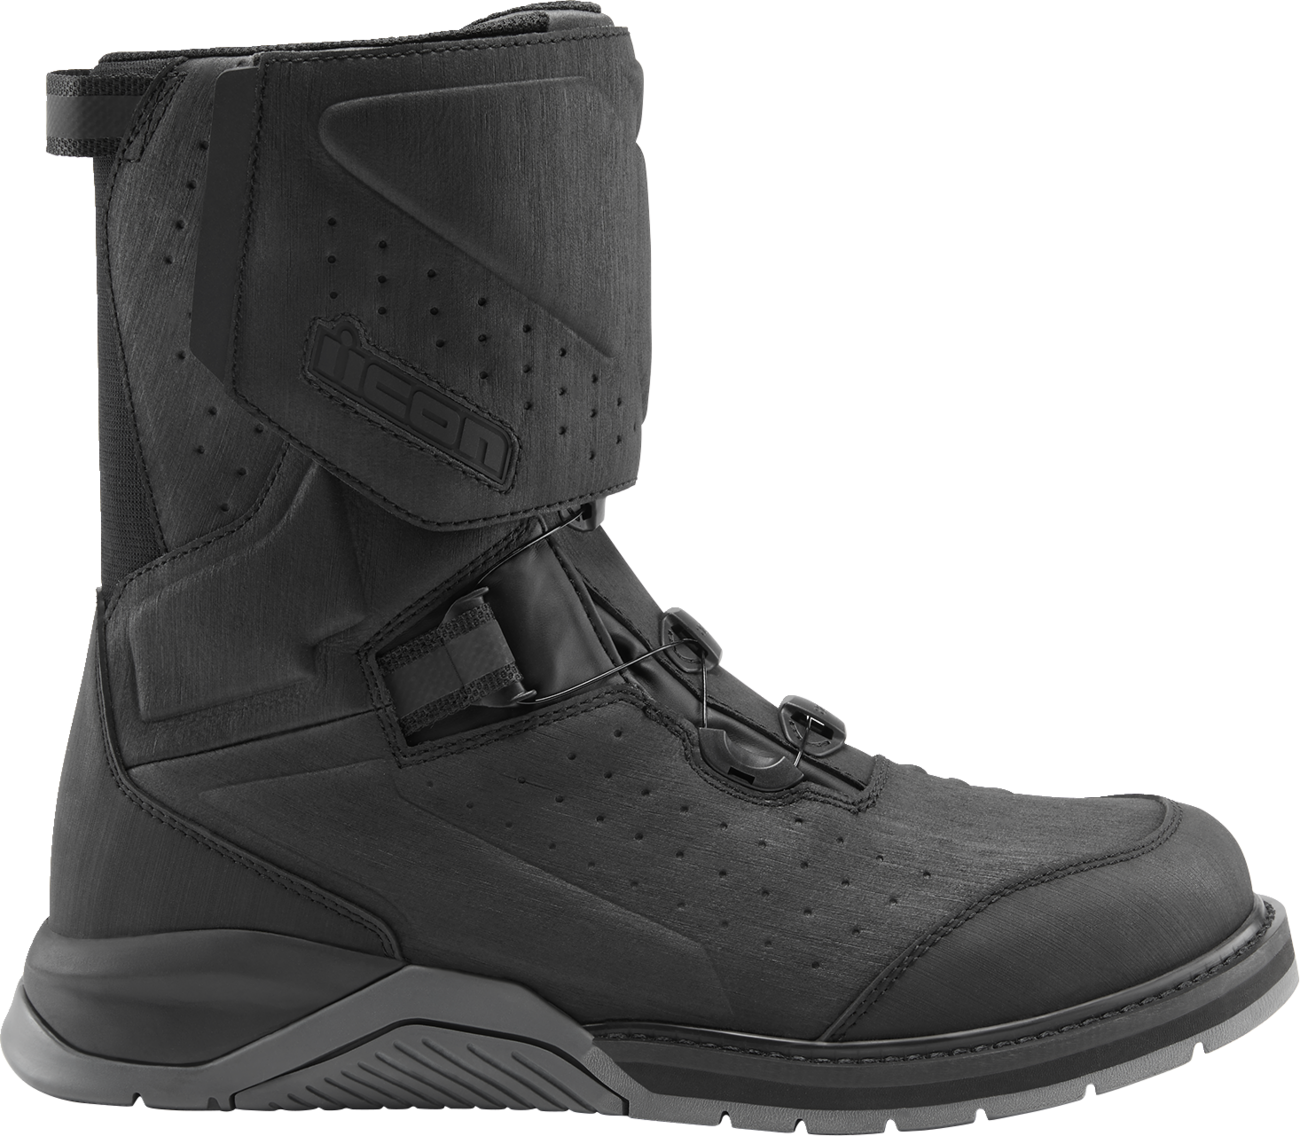 ICON Alcan Waterproof Boots - Black - Size 10 3403-1237